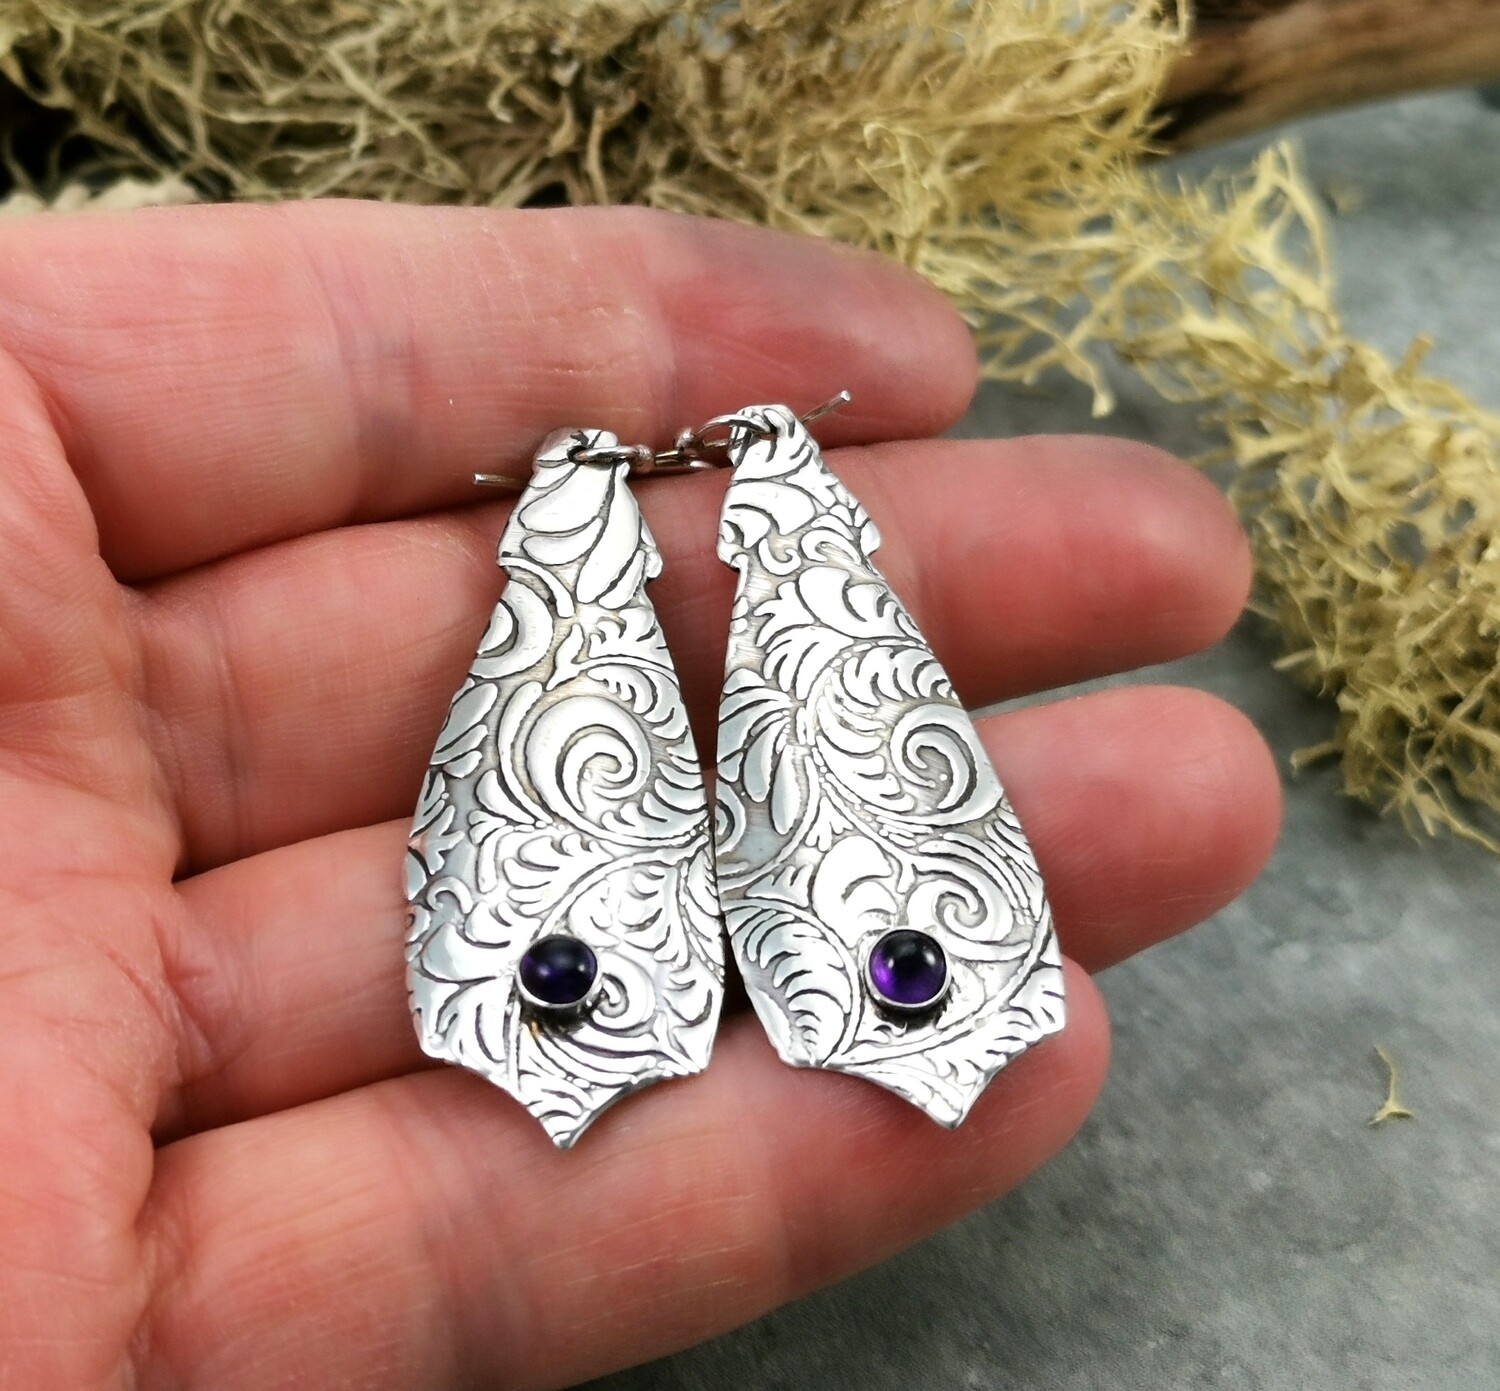 Arabesque Shaped Sterling Silver Earrings with Bezel set AAA Amethyst cabochon / Gifts for Her / Precious Metal / Dangle Earrings